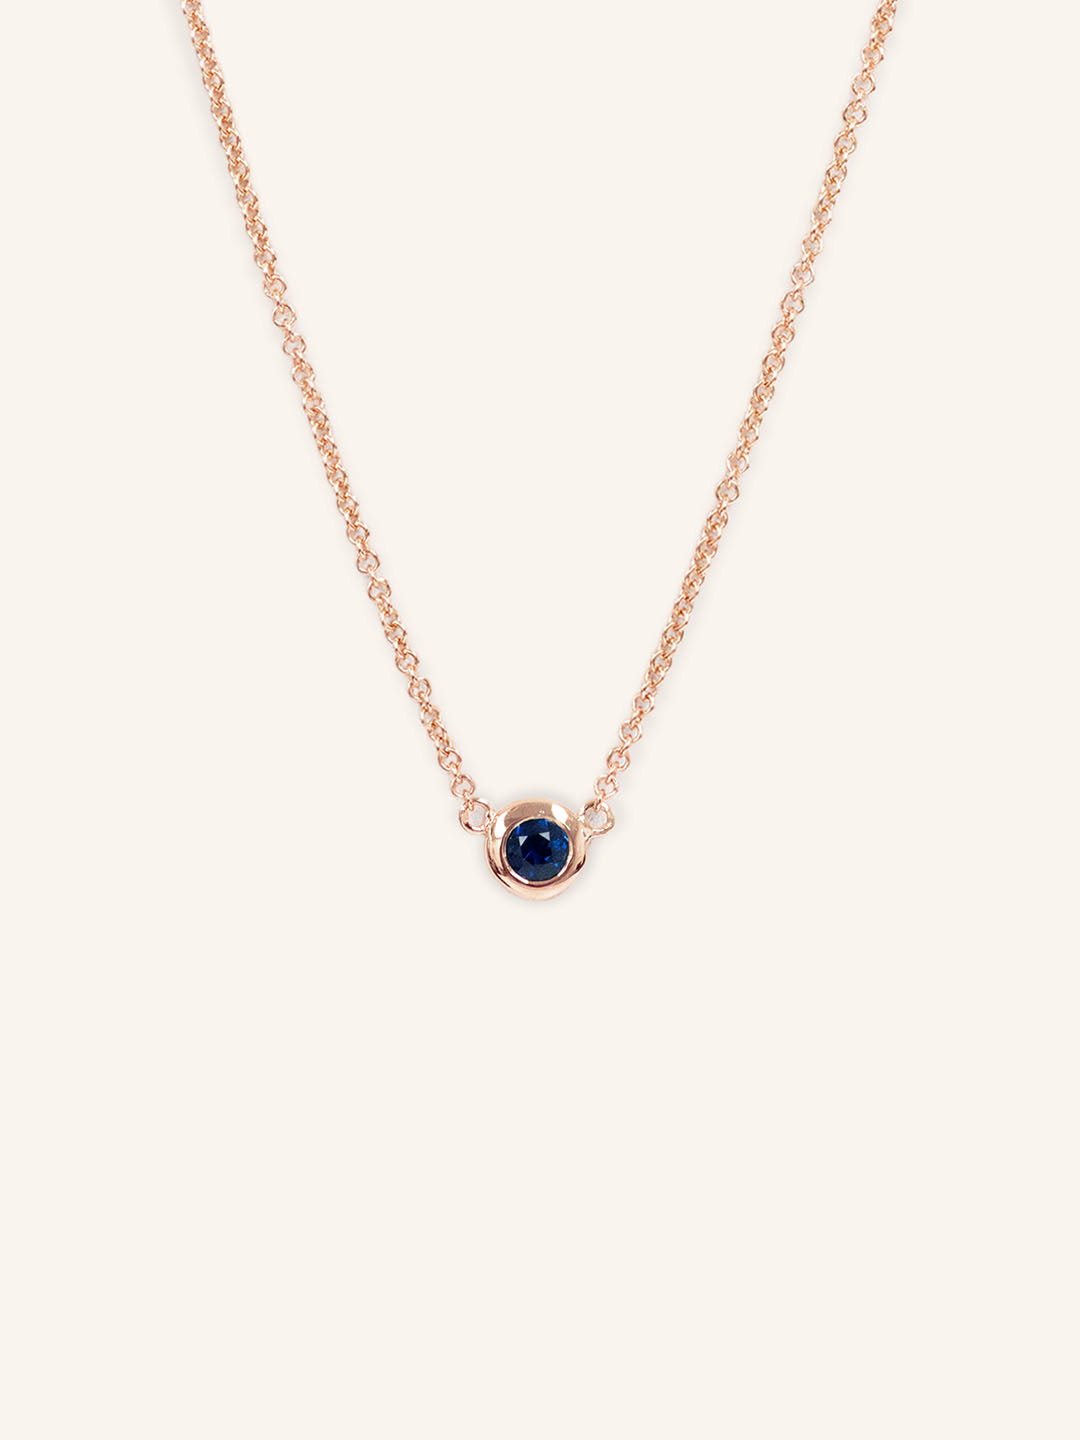 Fall into Autumn Blue Sapphire Necklace